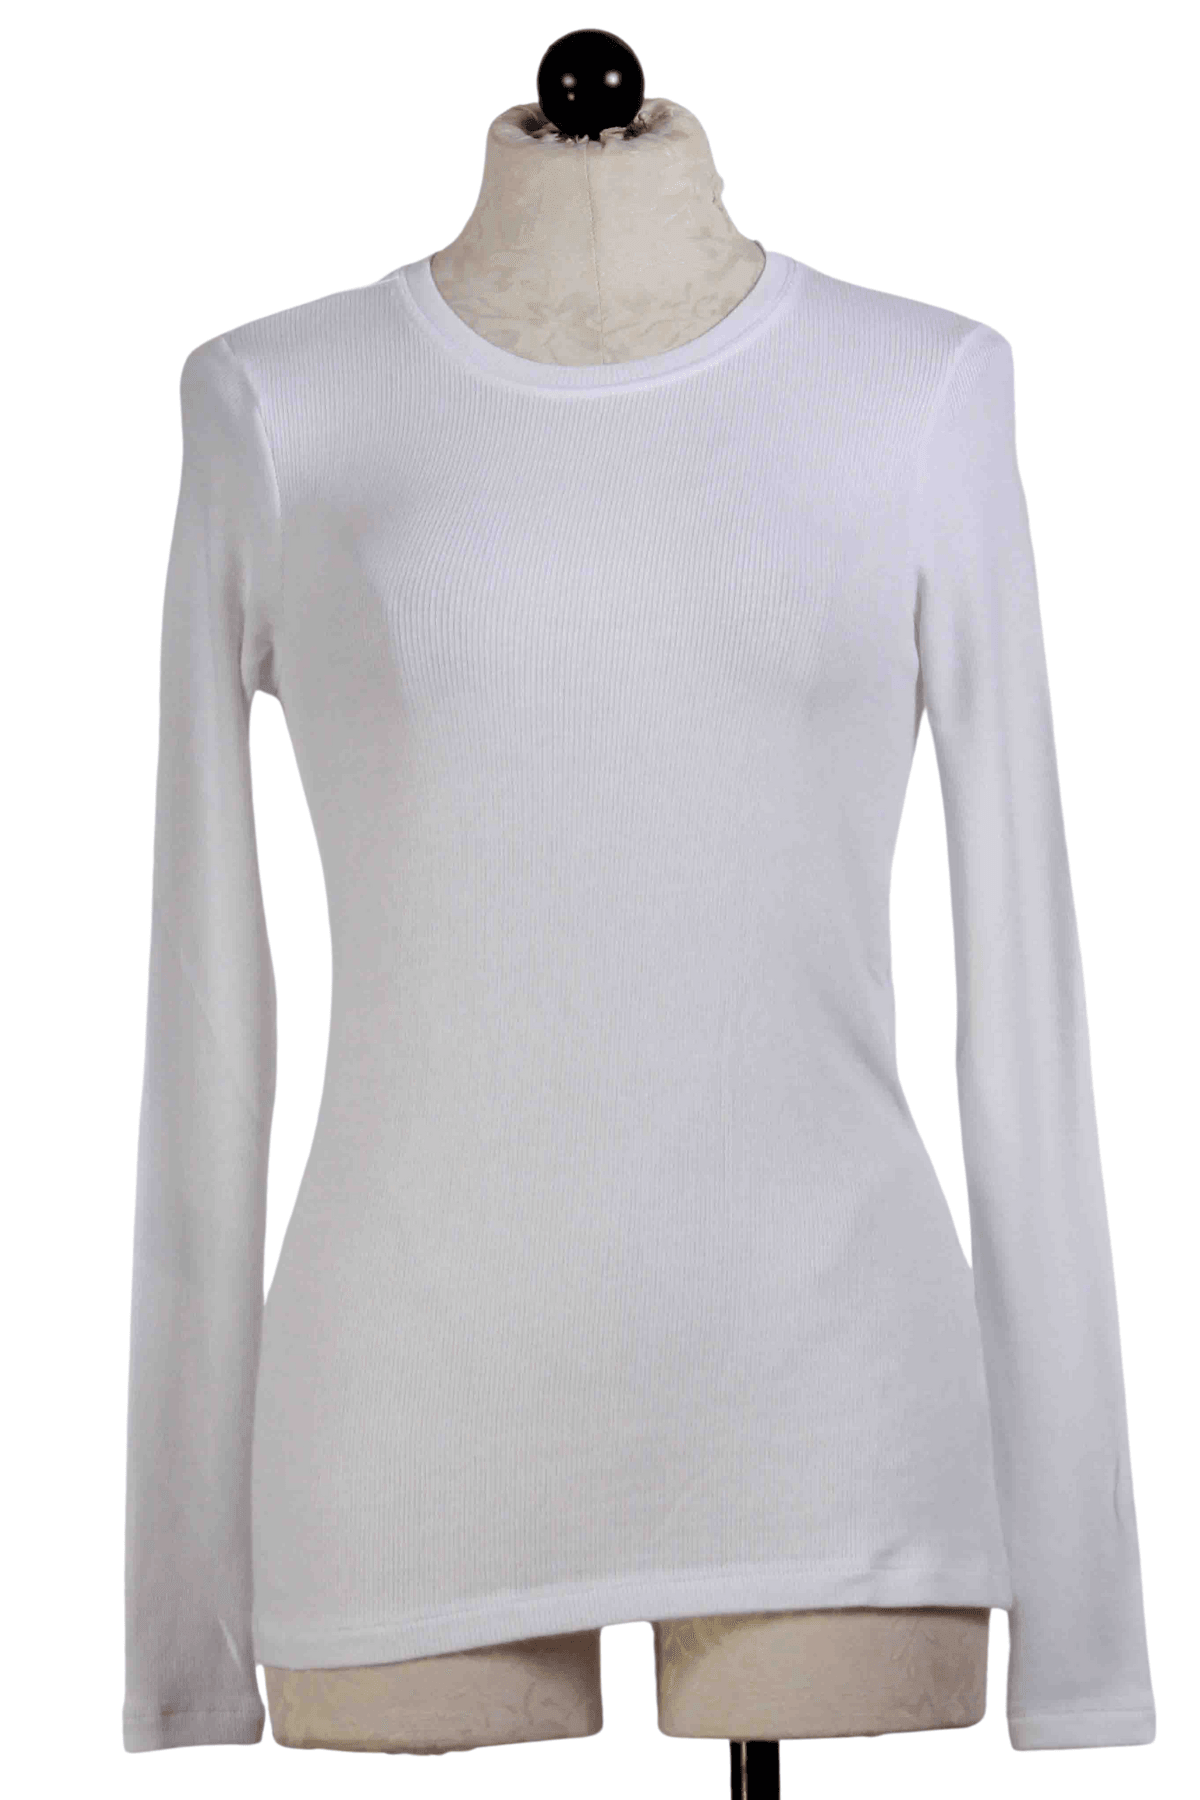 white Ribbed Long Sleeve Tee by Goldie Tees